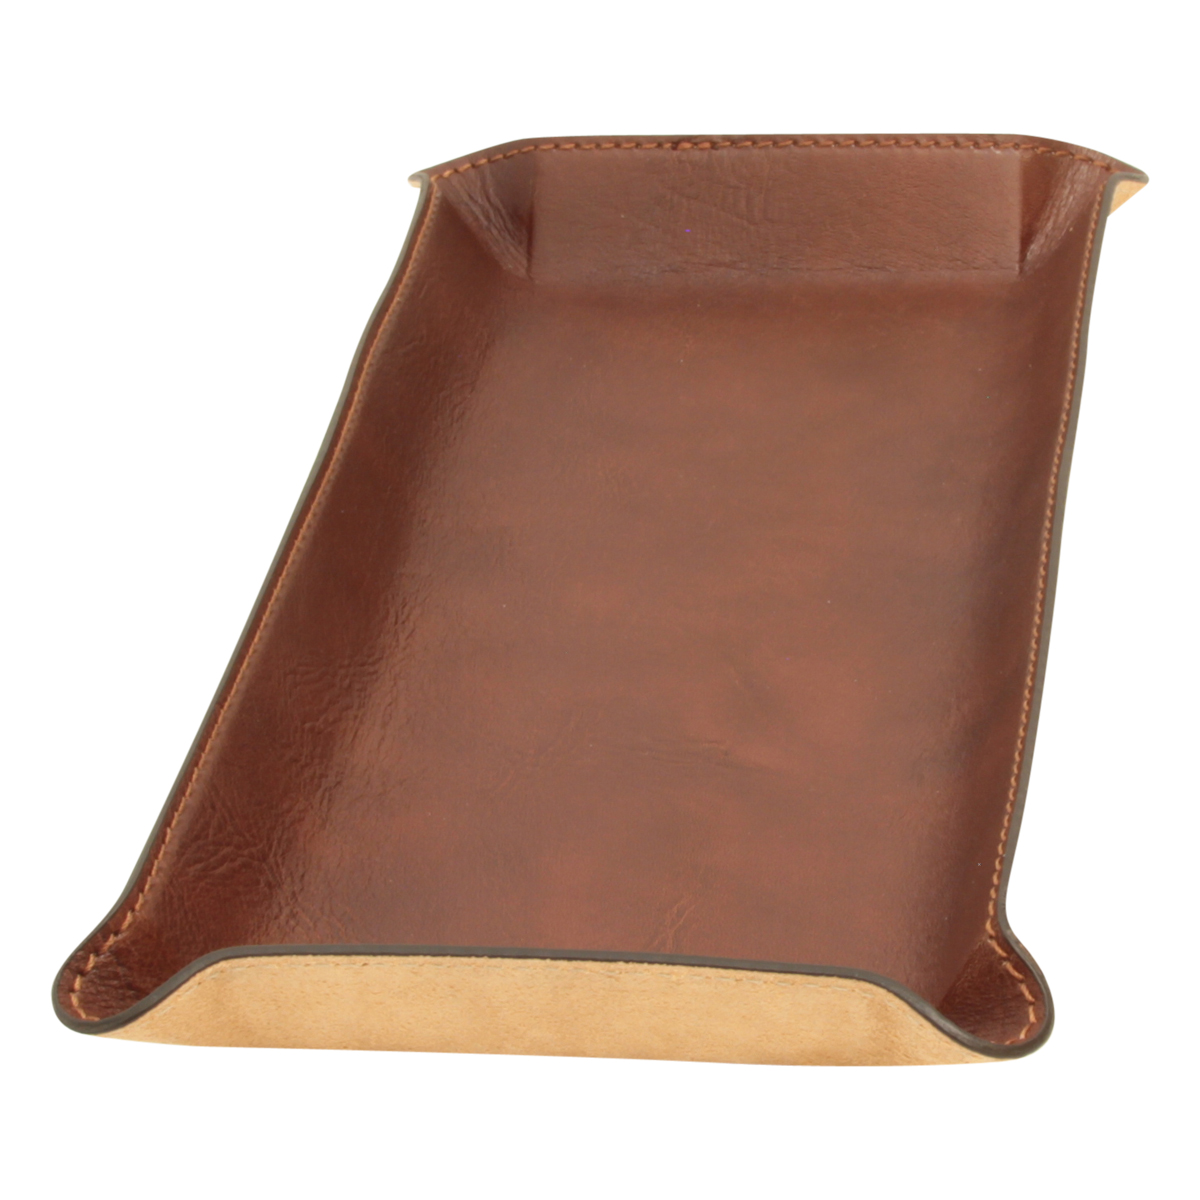 Leather Desk Tray - Brown | 762089MA US | Old Angler Firenze